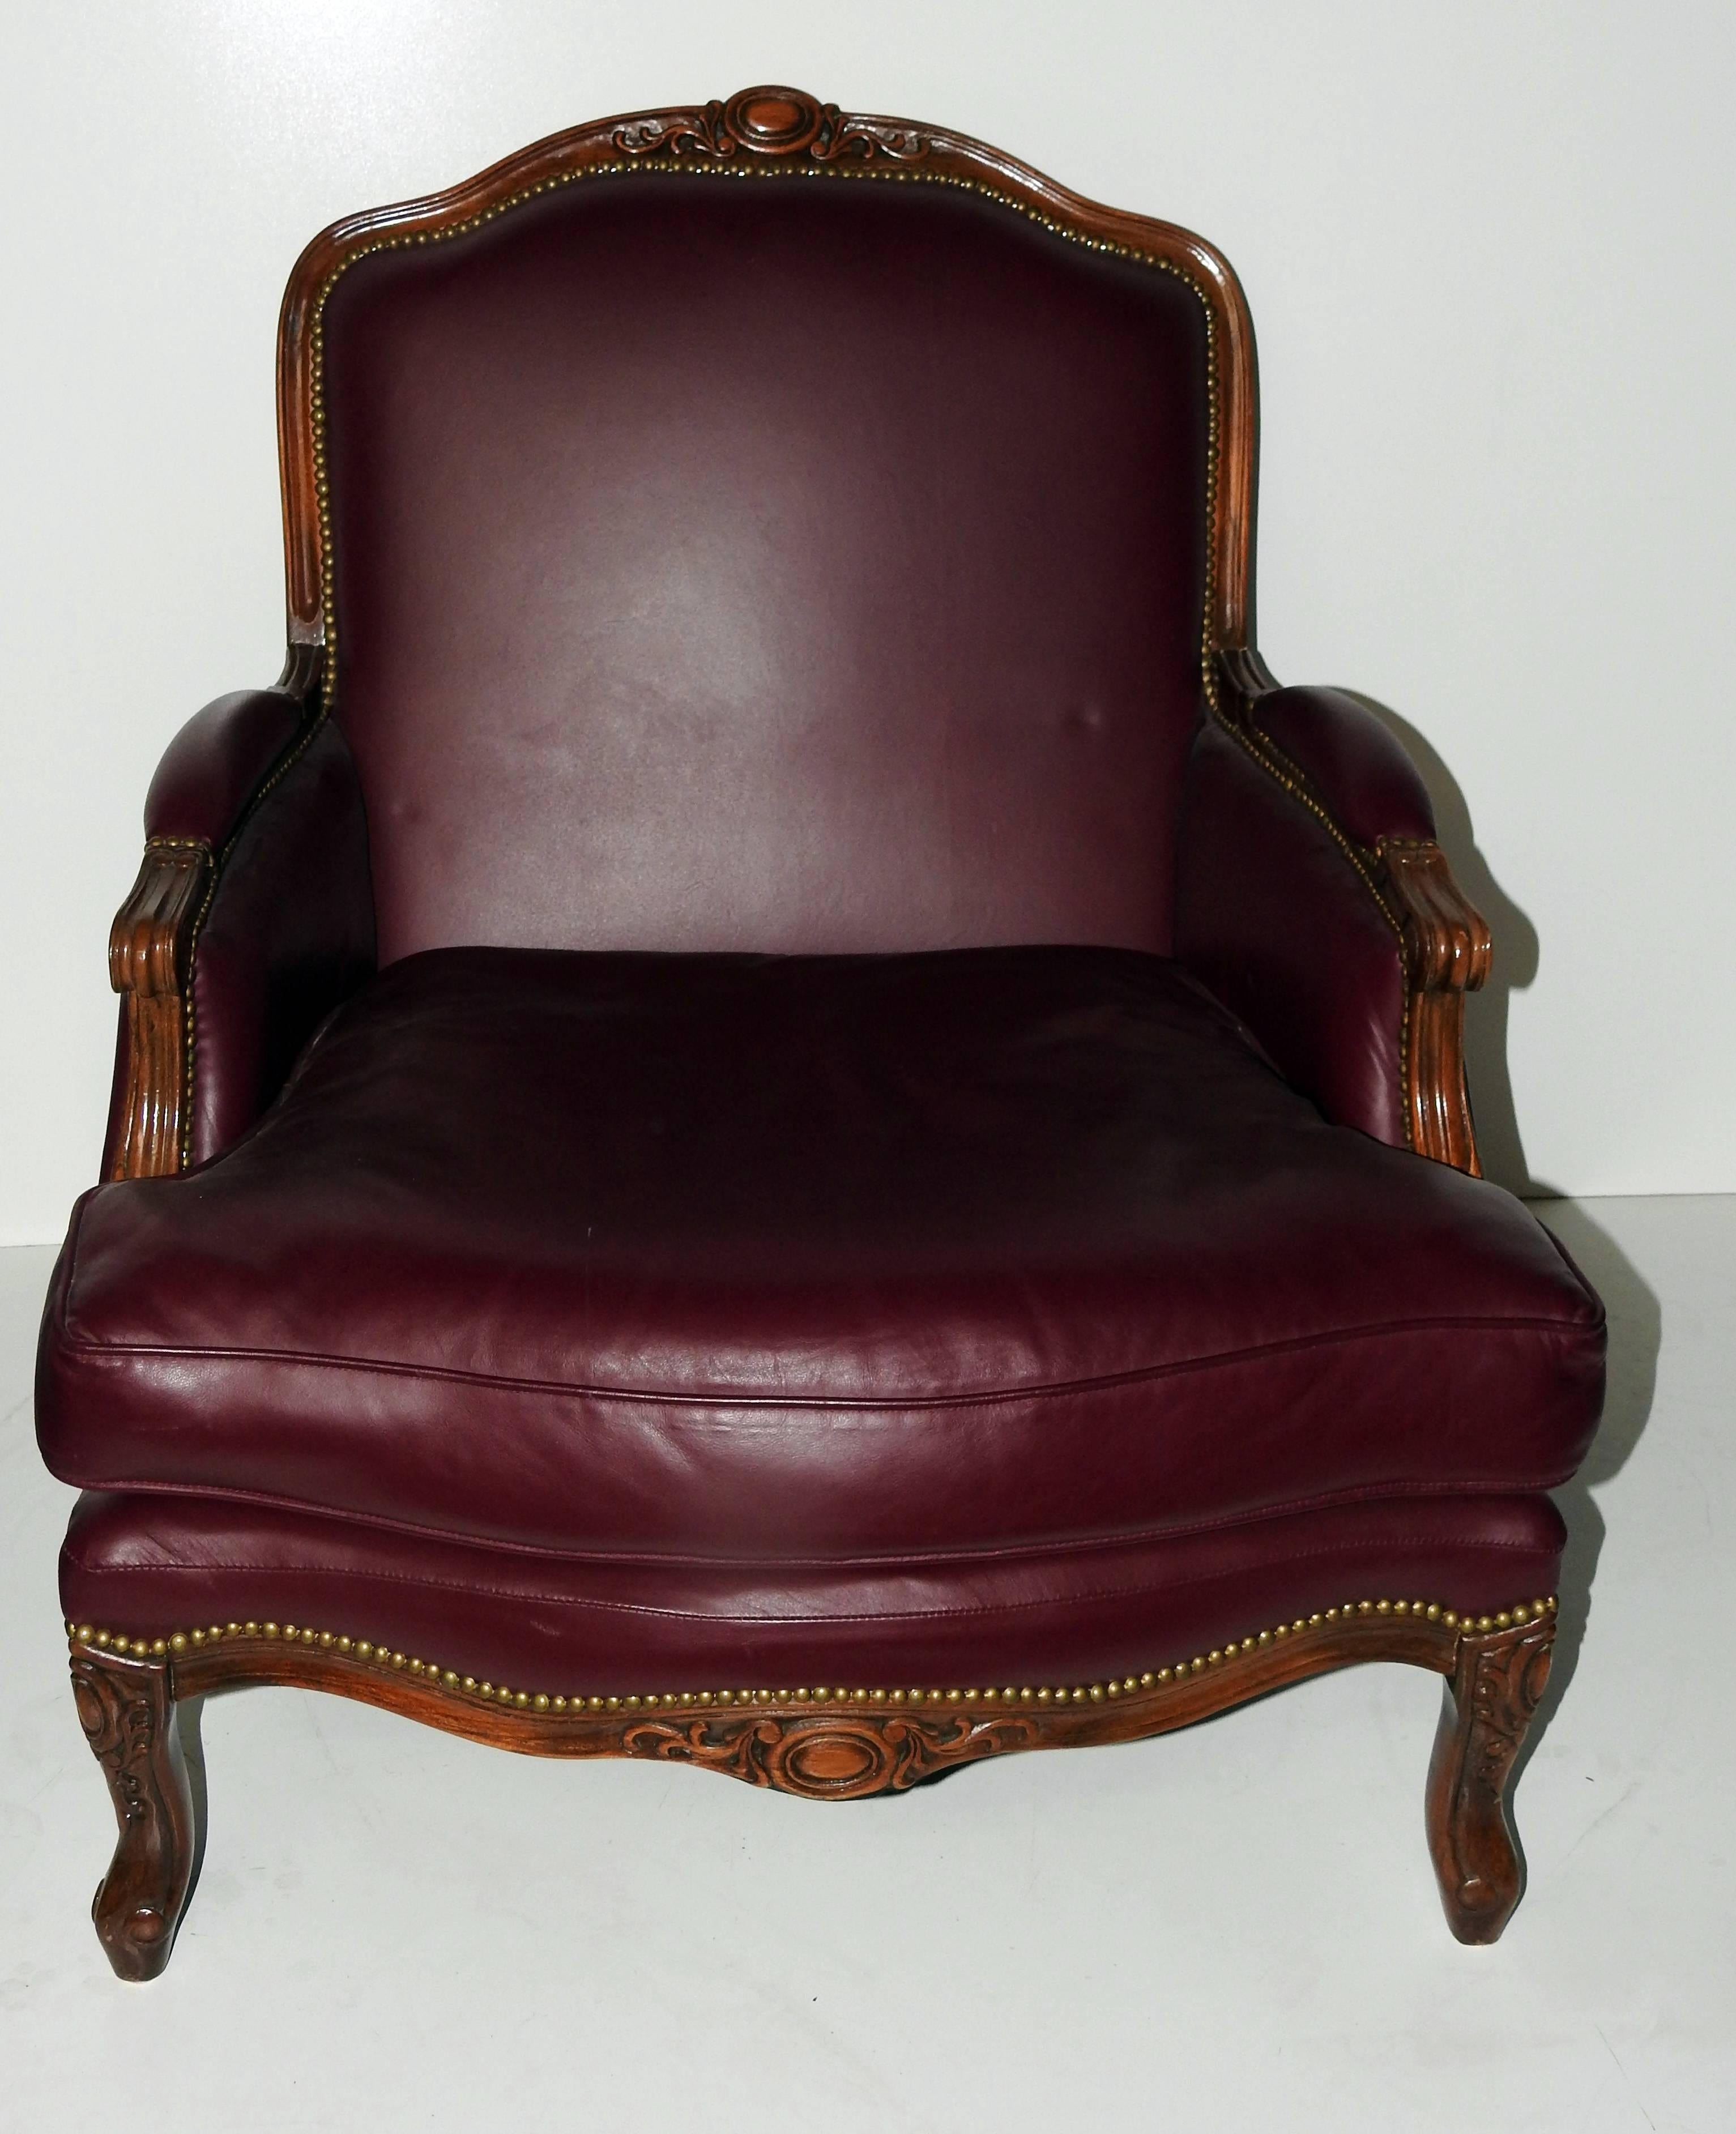 Leather club chair and ottoman with nailhead trim by Baker Furniture. The ottoman measures 33